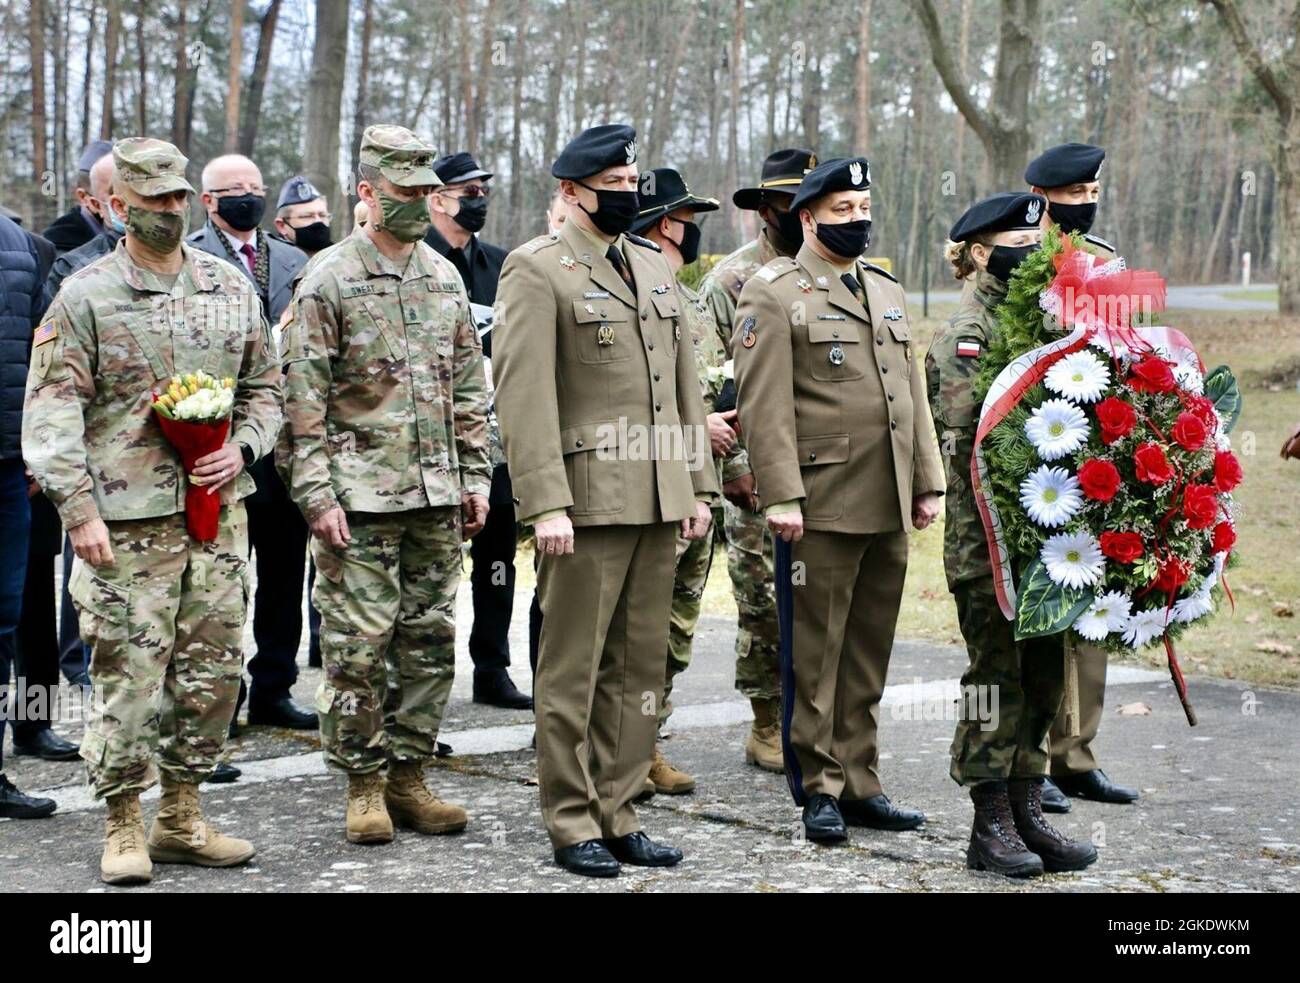 Army Col. Ricardo Roig (far left, holding flowers), 50th Regional Support Group (RSG) commander, and Command Sgt. Maj. Robert Sweat (second from the left in camouflage uniform), 50th RSG command sergeant major, attend a remembrance ceremony in Zagan, Poland, on Mar. 24, 2021, with representatives of the Polish and American militaries, as well as local officials. The ceremony commemorates the efforts of Allied service members who participated in the “Great Escape” from Stalag Luft III, a German prison-of-war camp, in March 1942. The 50th RSG, a Florida Guard unit based in Homestead, Florida, is Stock Photo